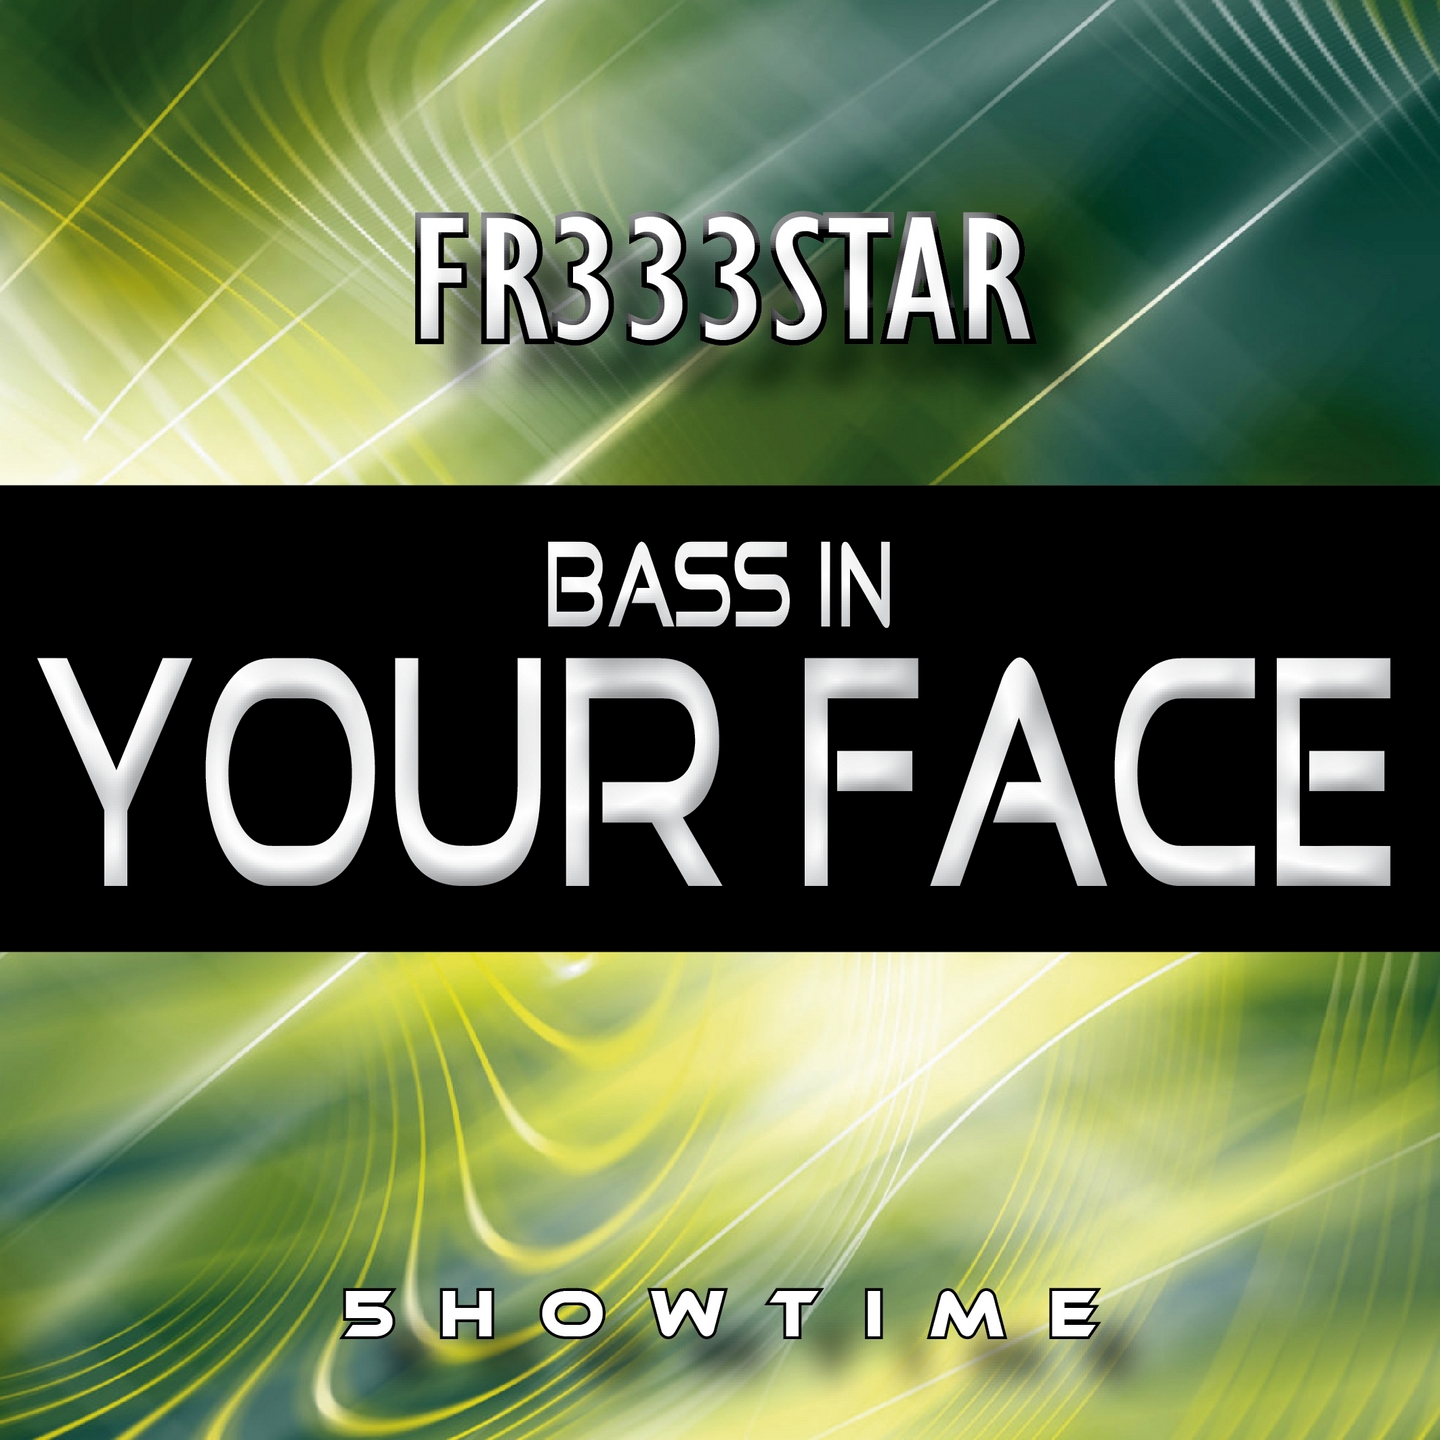 Fr333star announces release of his brand new electro house single ‘Bass in your Face’